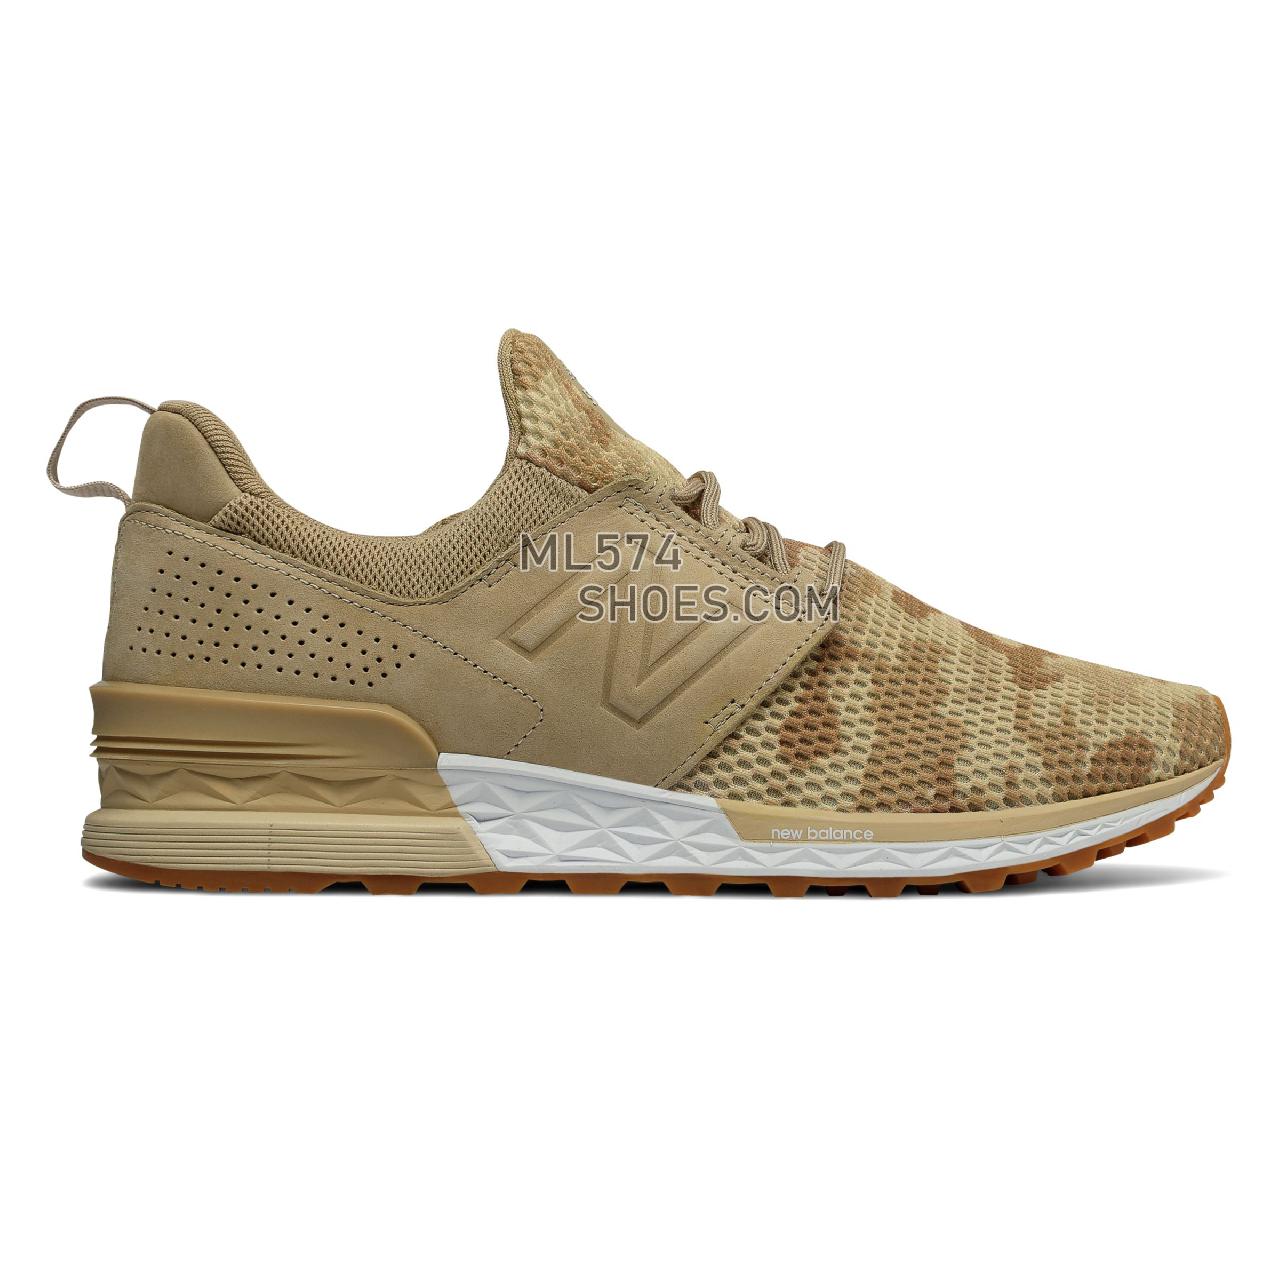 New Balance 574 Sport Decon - Men's 574 - Classic Incense with Tan - MS574DCB